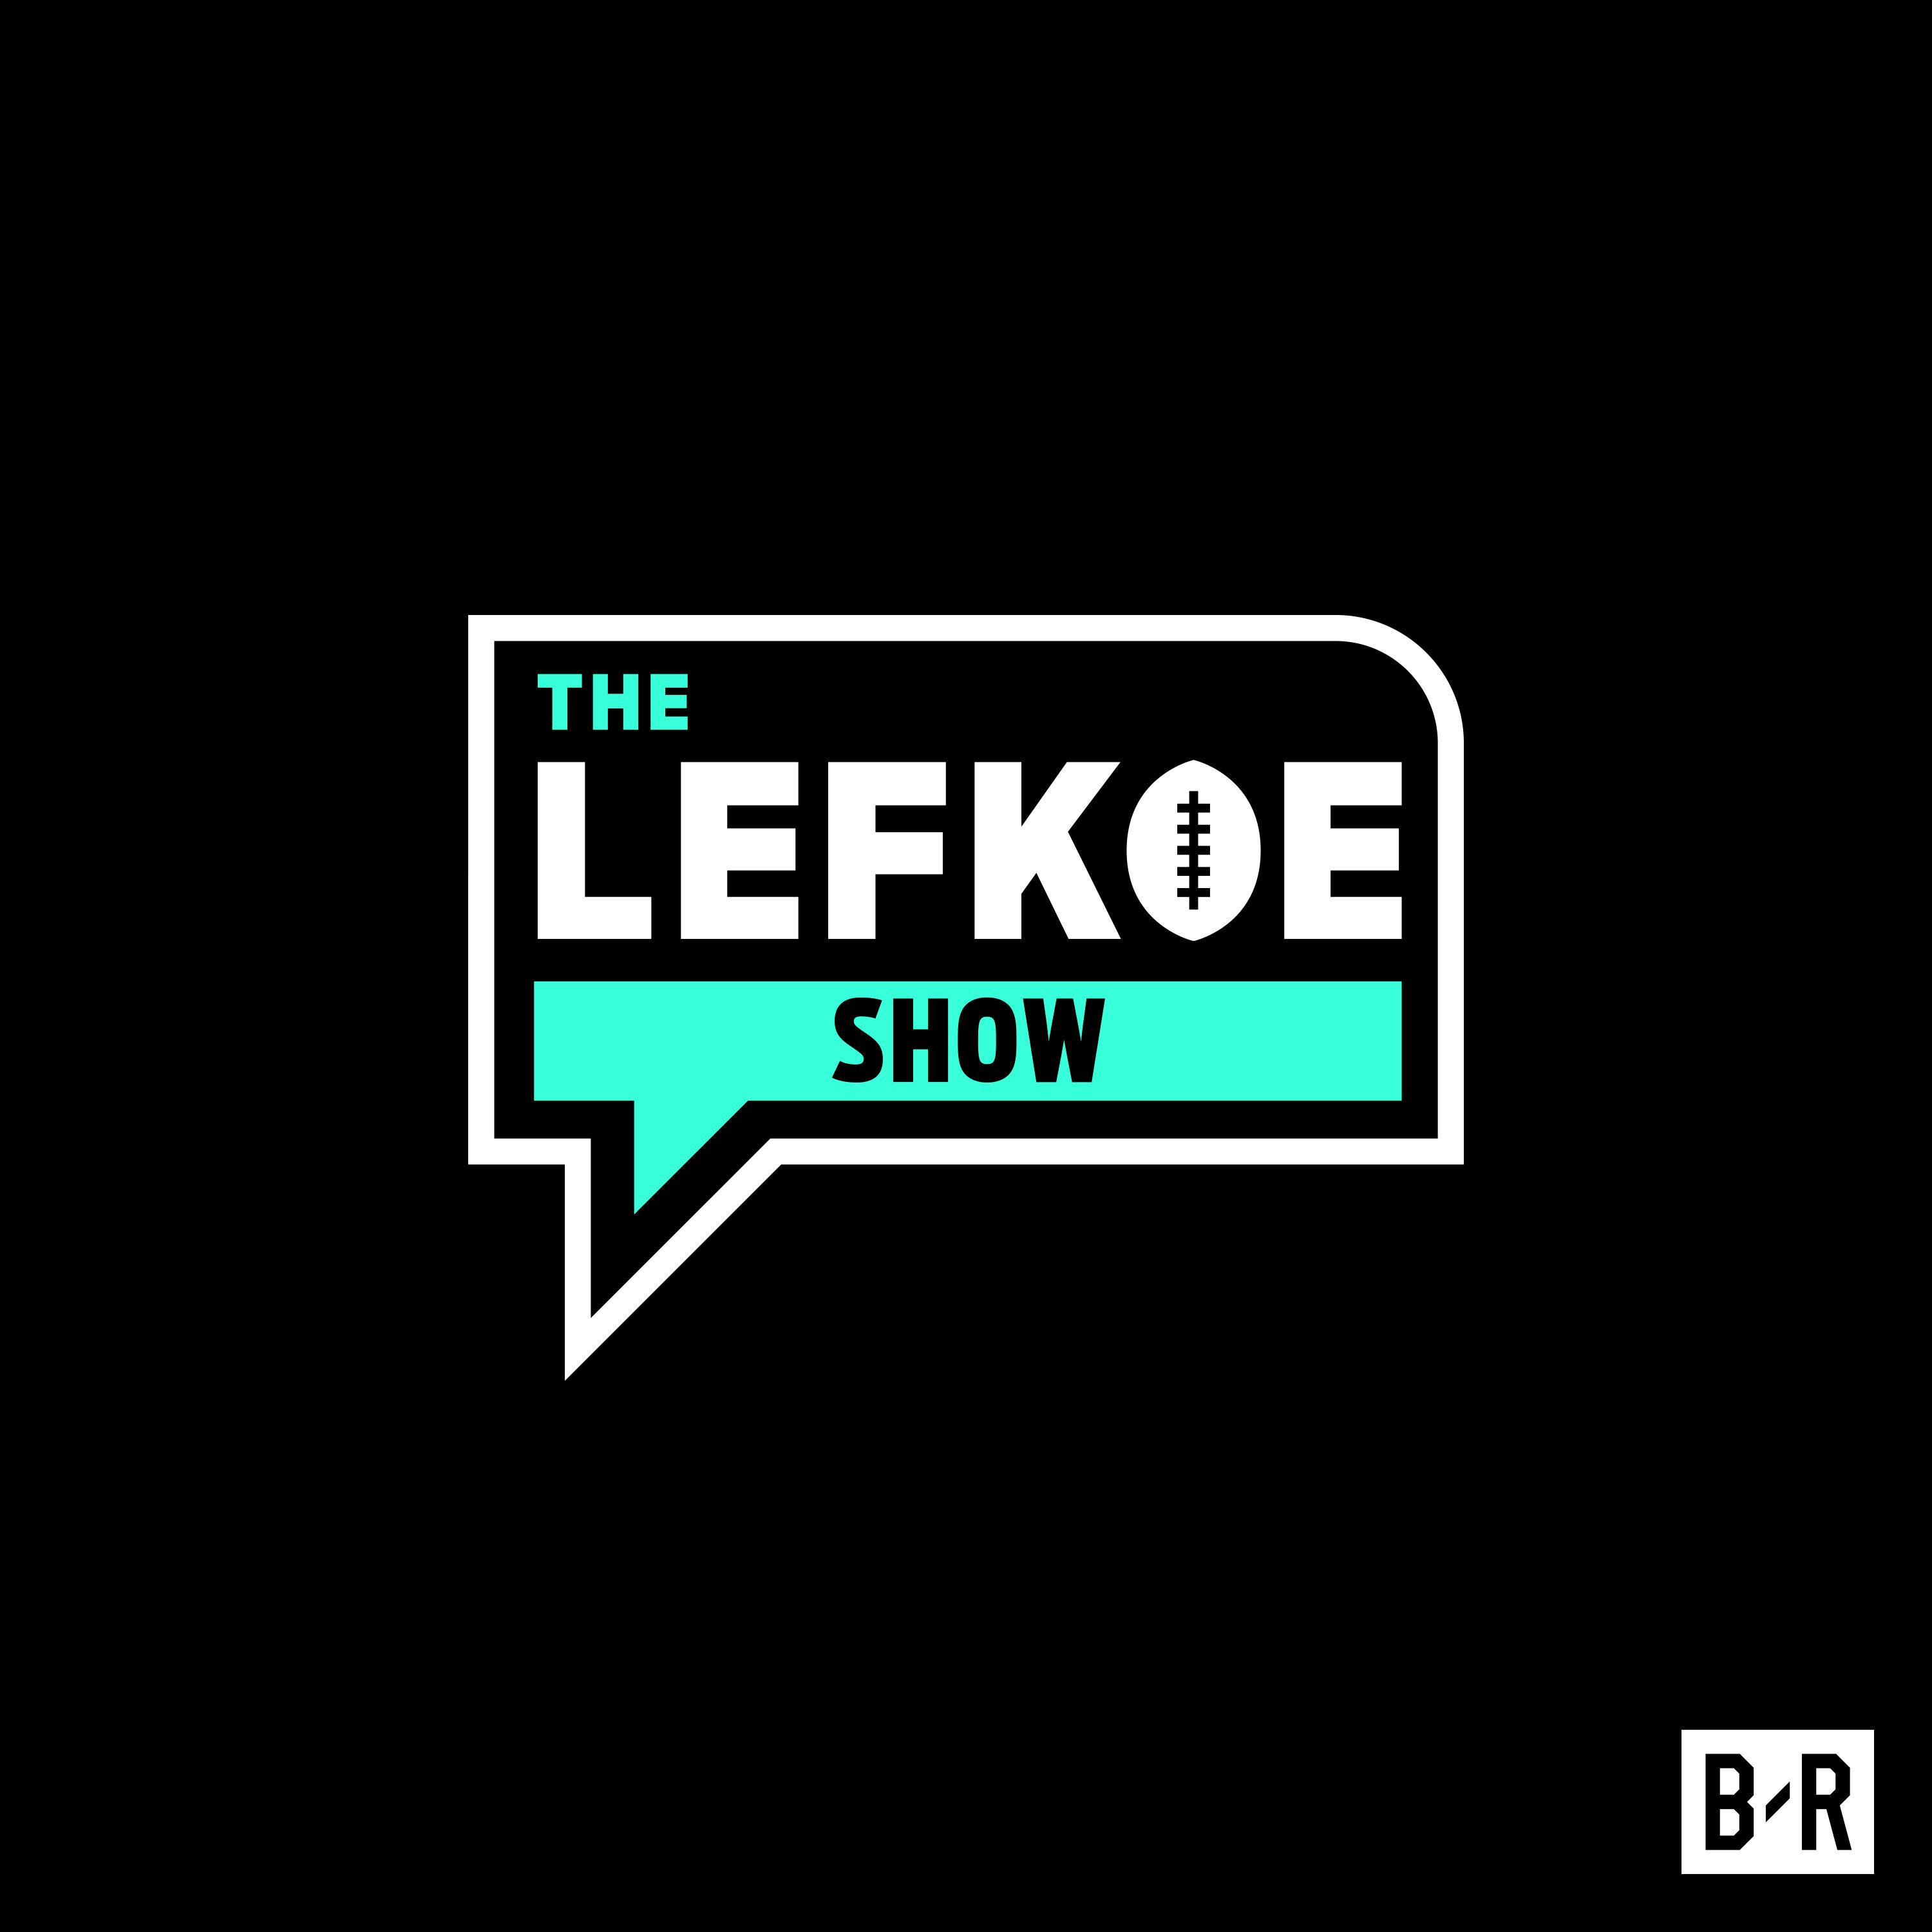 Maxx Crosby on Sacking Mahomes, the Move to Vegas, and the Courage To Post Online About Social Issues | The Lefkoe Show